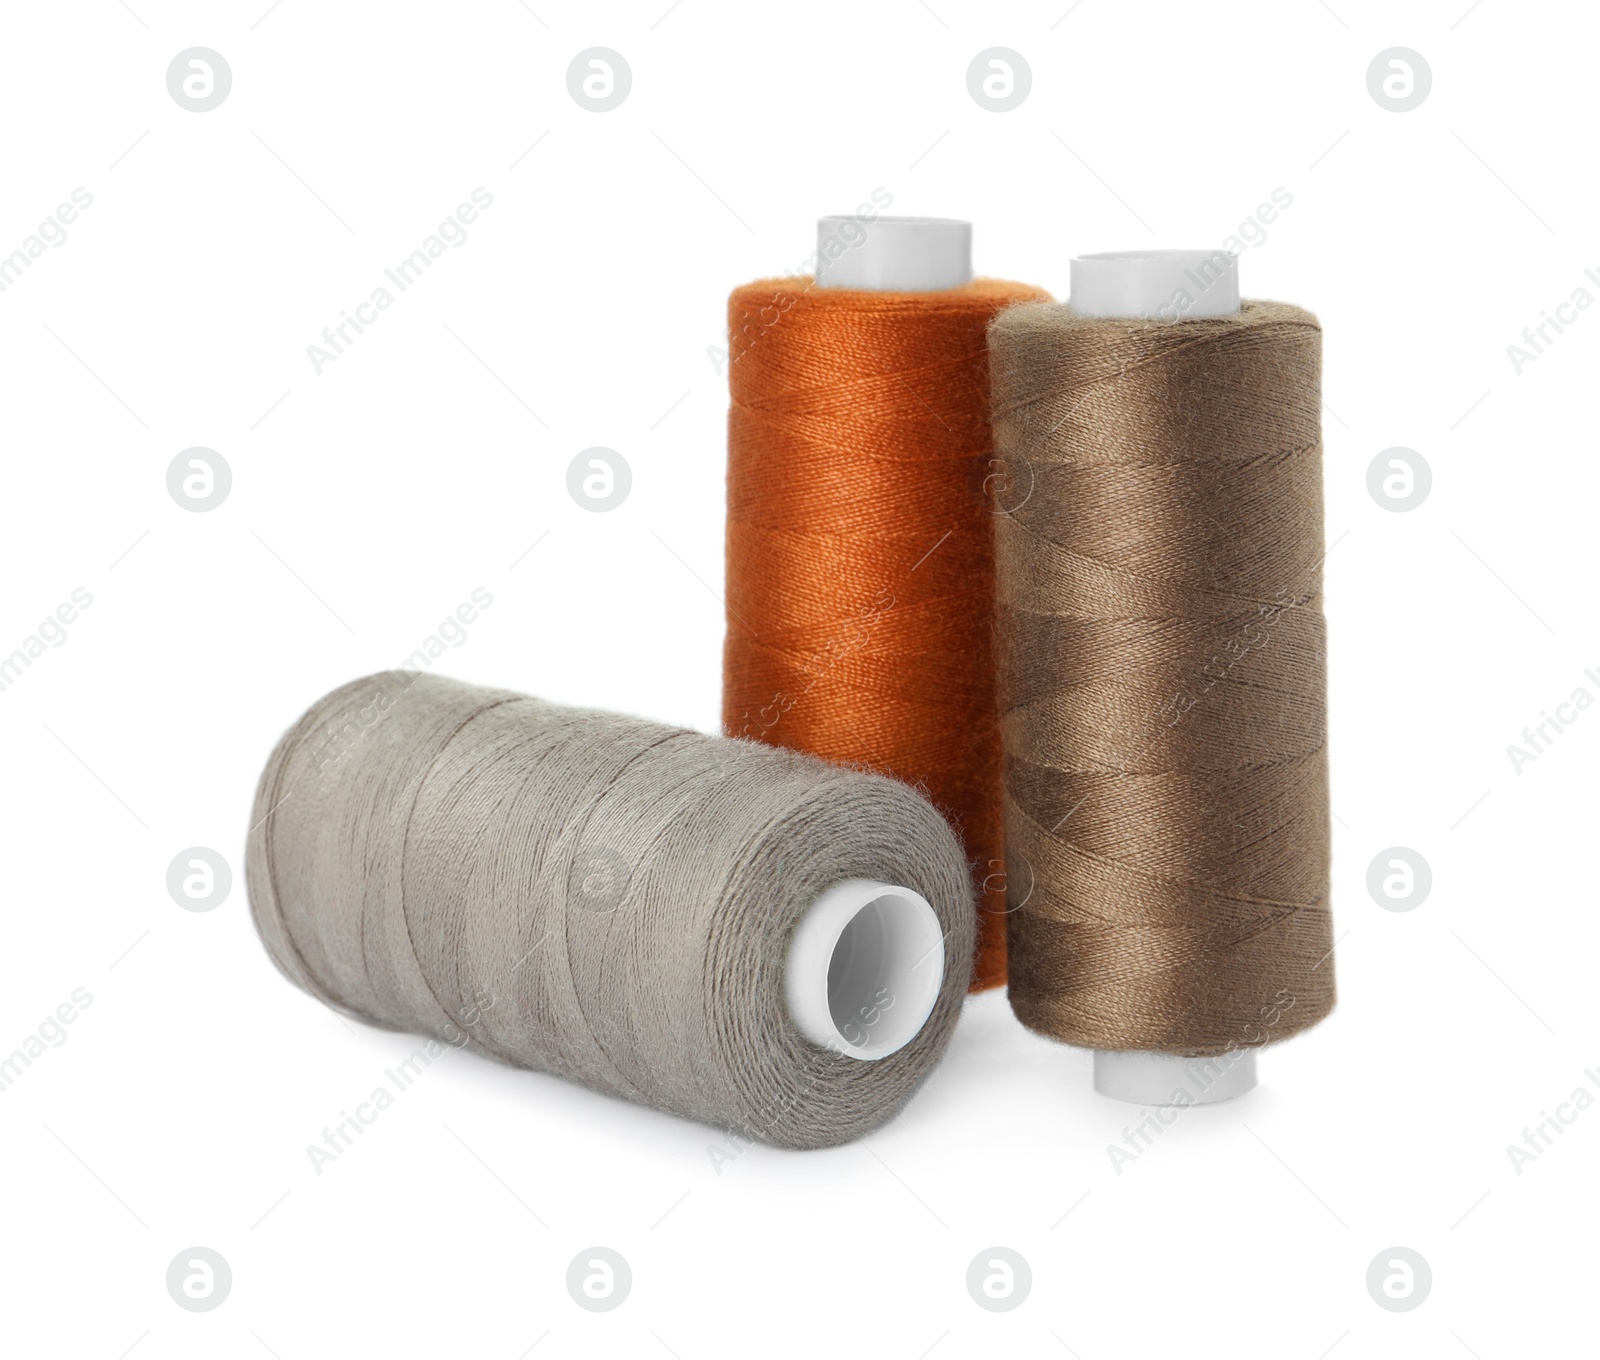 Photo of Different colorful sewing threads on white background